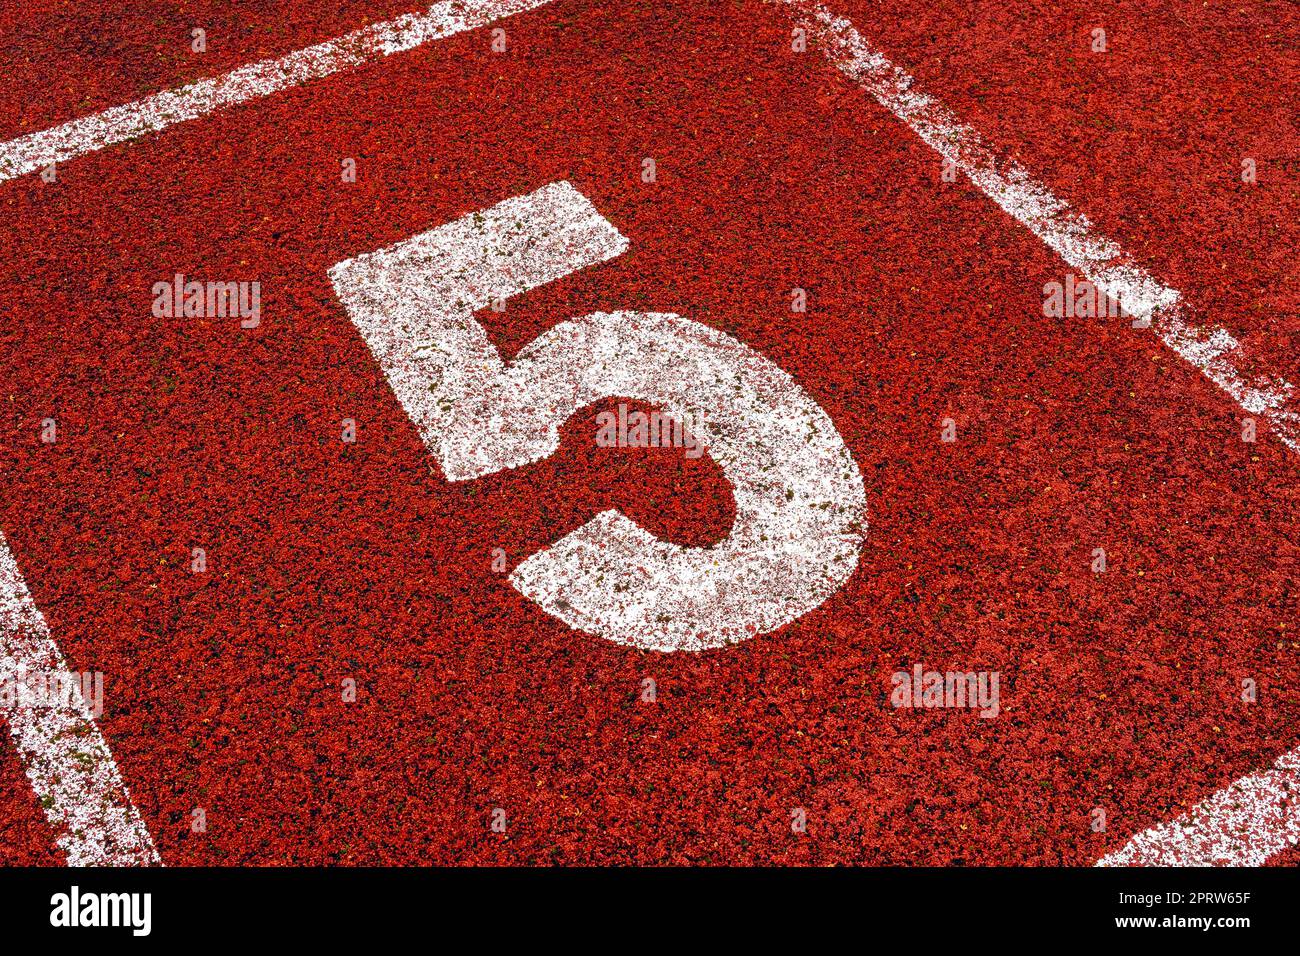 The number 5 at start point of running track or athlete track in stadium Stock Photo